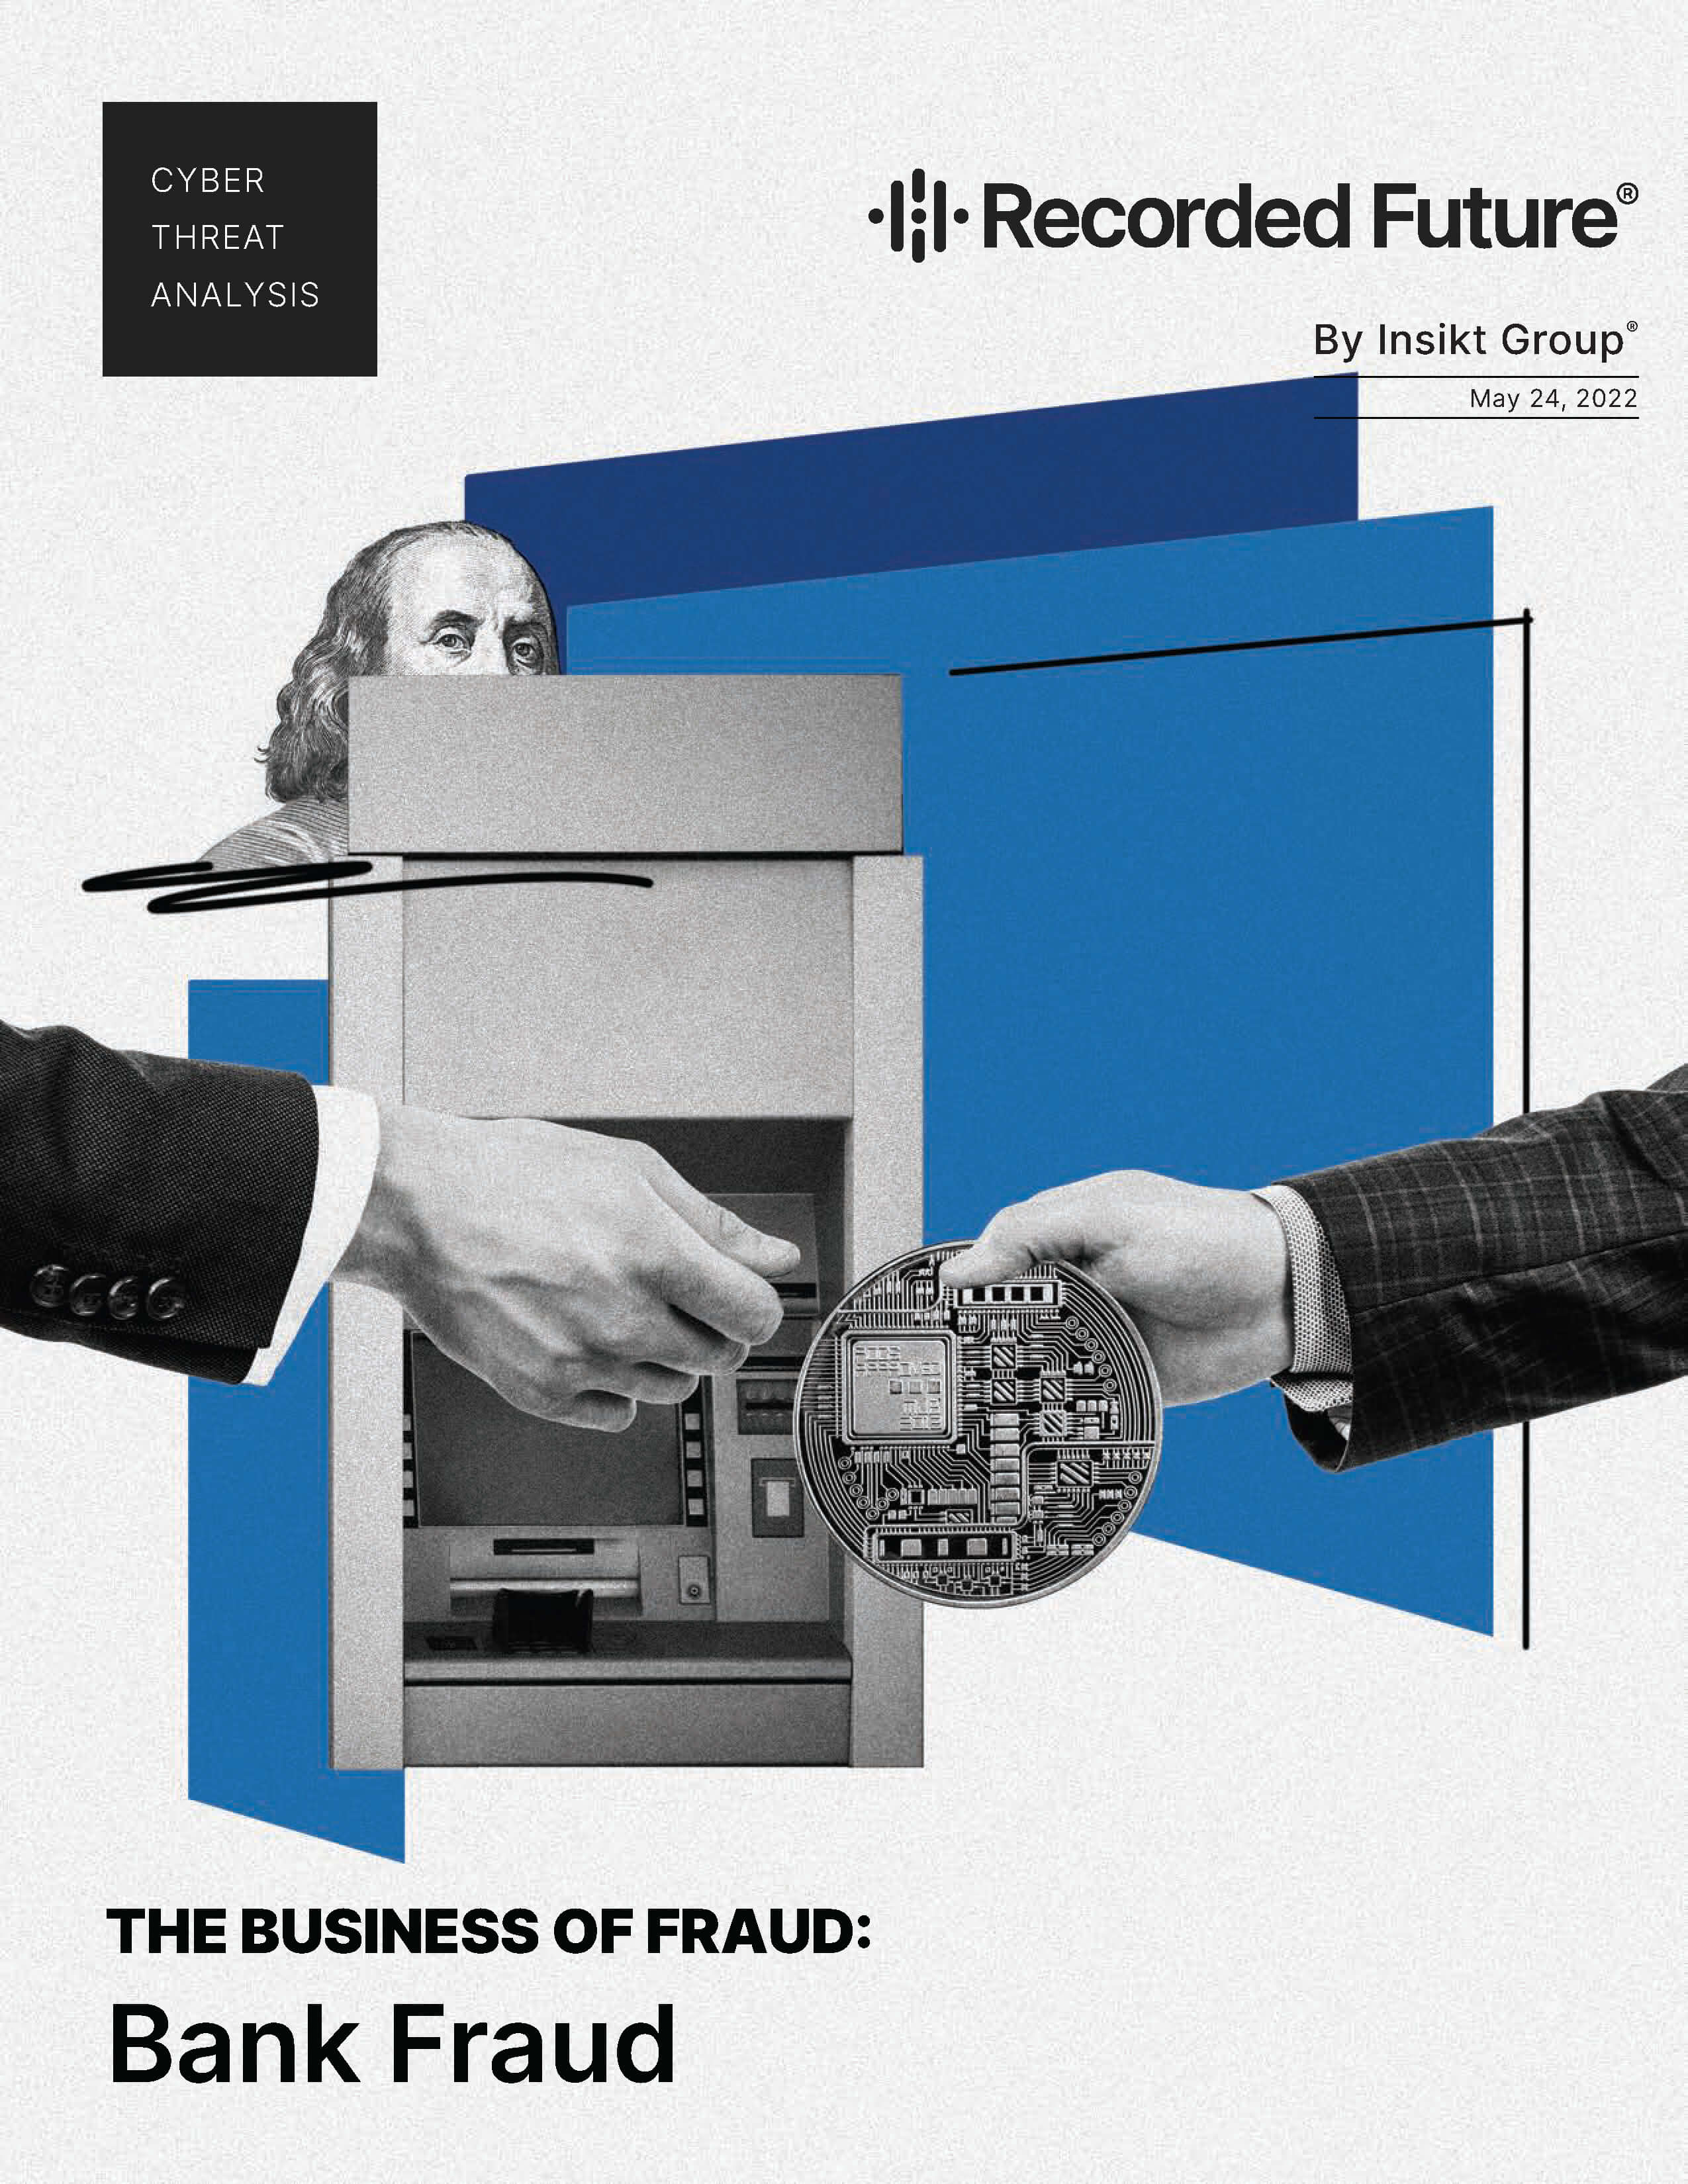 The Business of Fraud: Bank Fraud Report